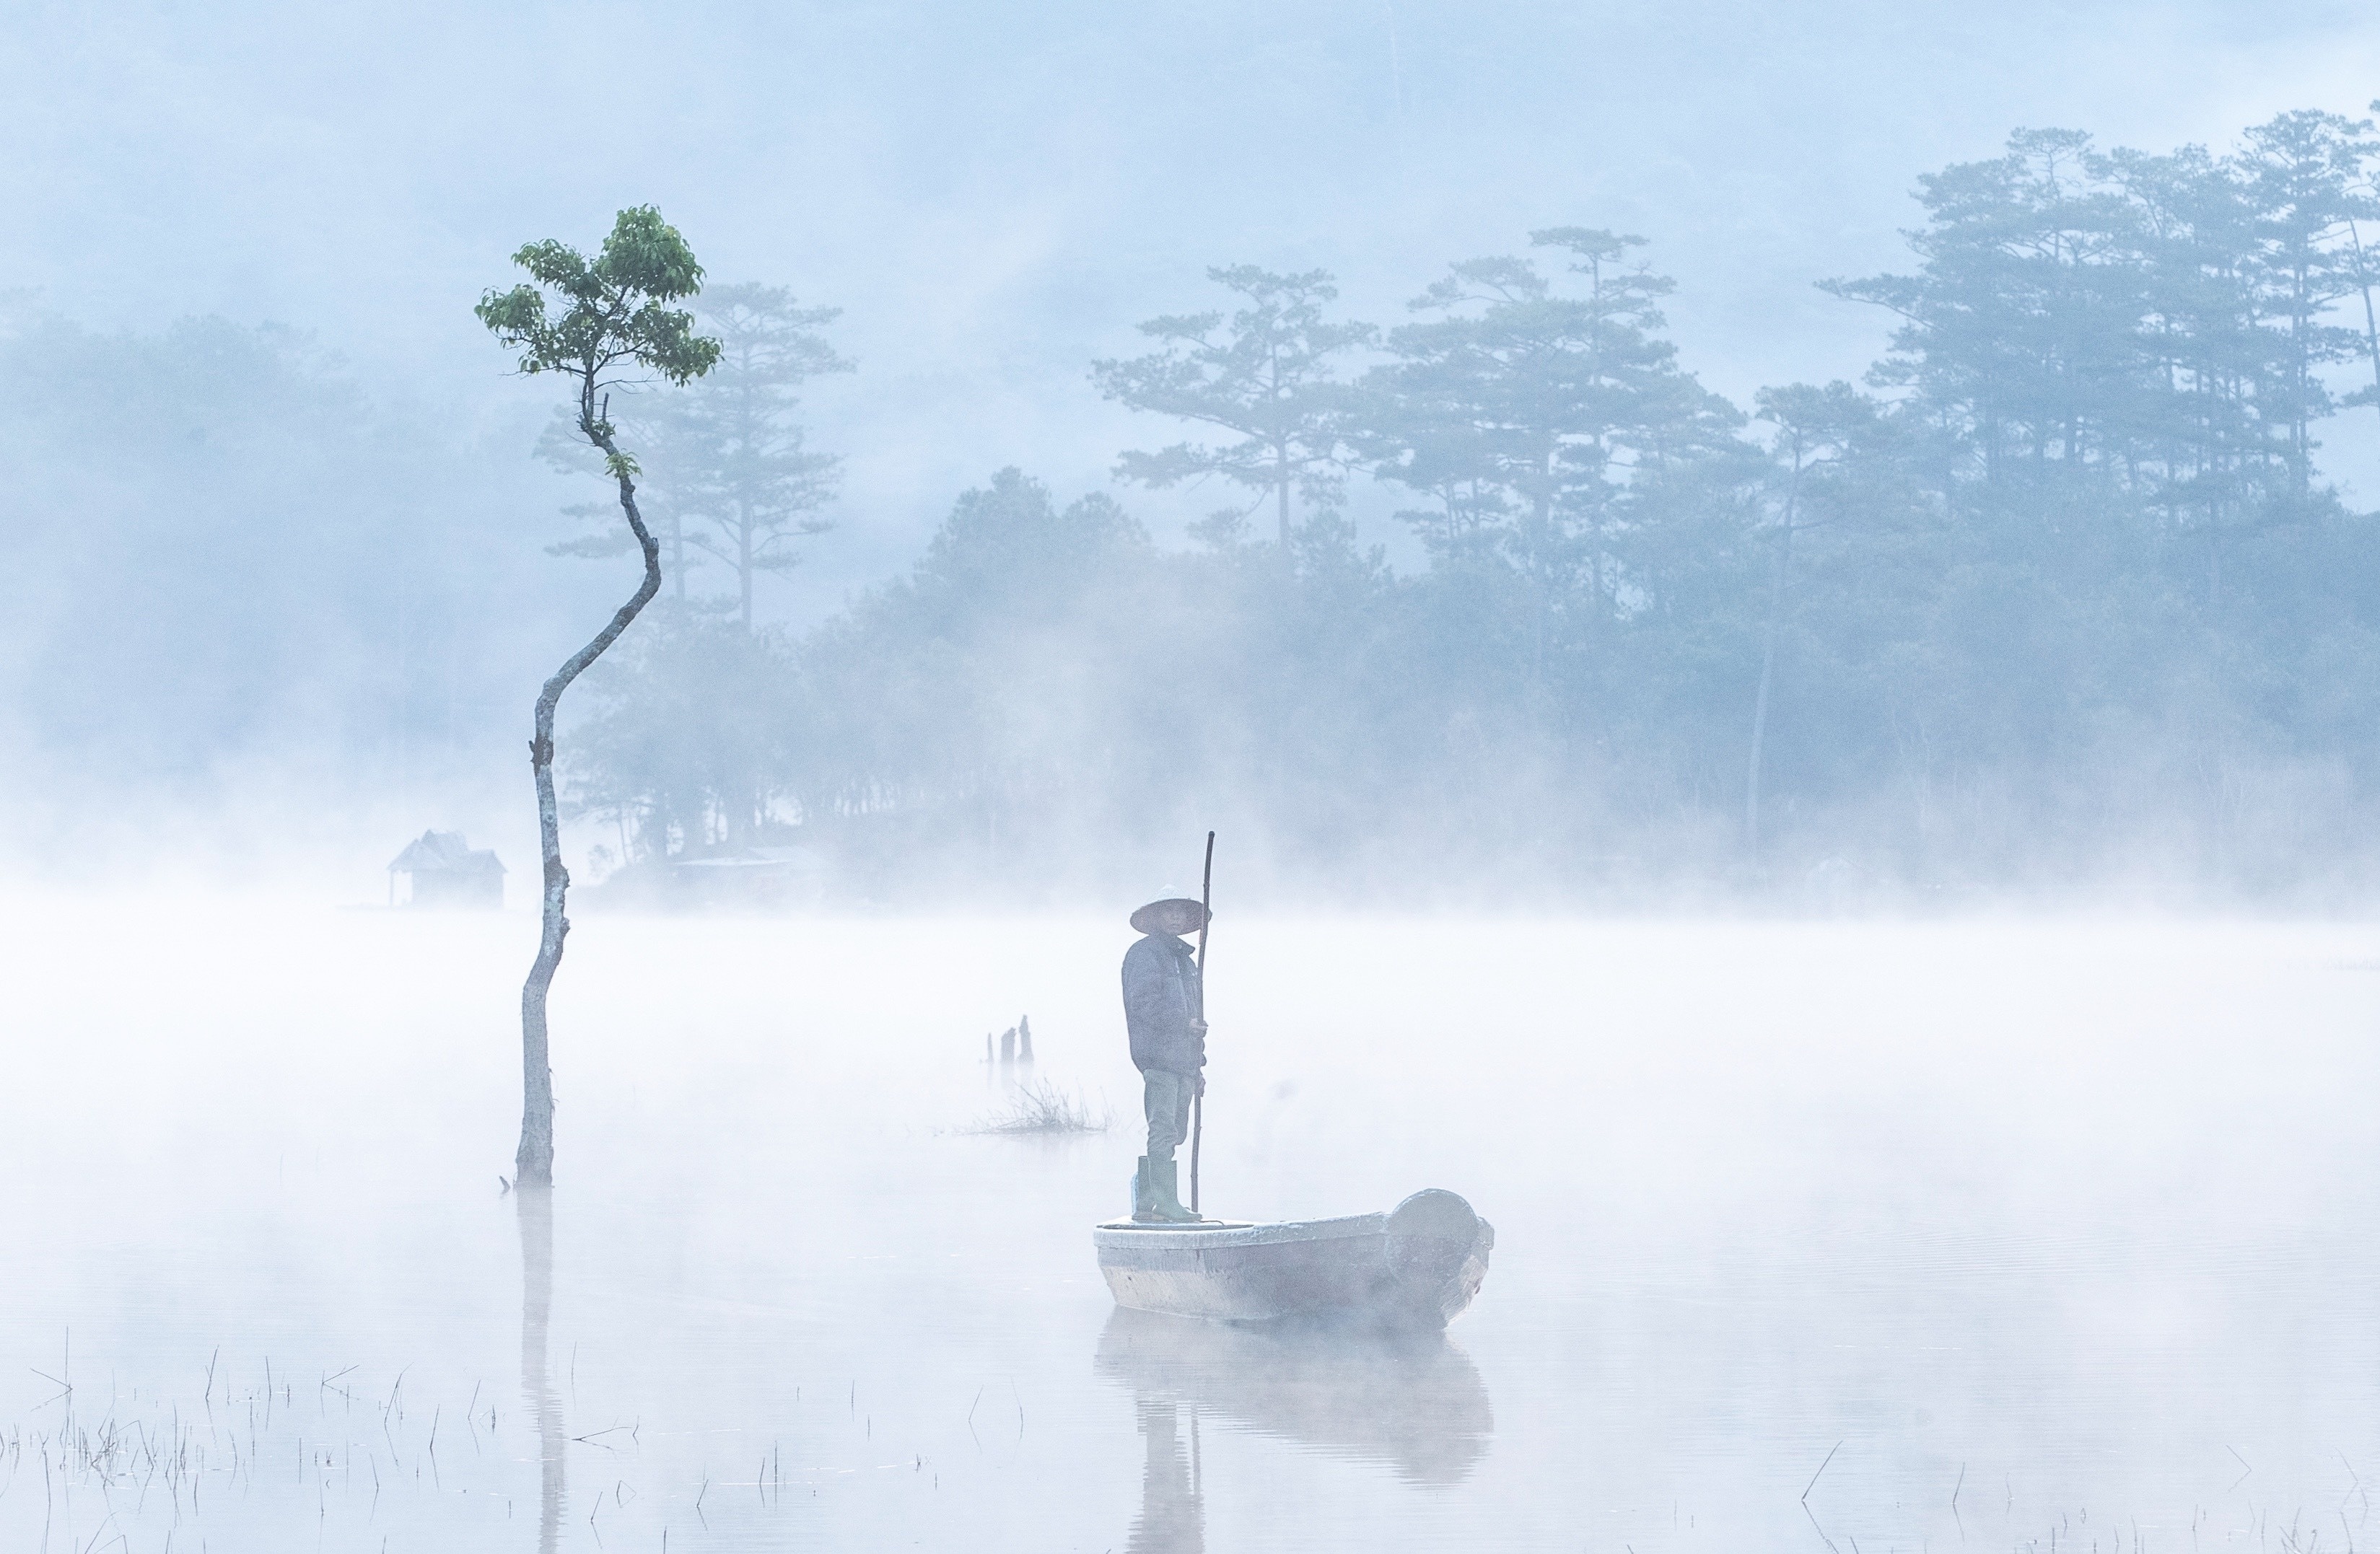 A Lonely tree at Tuyen Lam Lake. This place has been recognized by National Geographic in 2017 .
Get there 45 before sunrise & between December thru mid April for the mist. And if you’re lucky enough you’ll catch some local fishermen rowing around